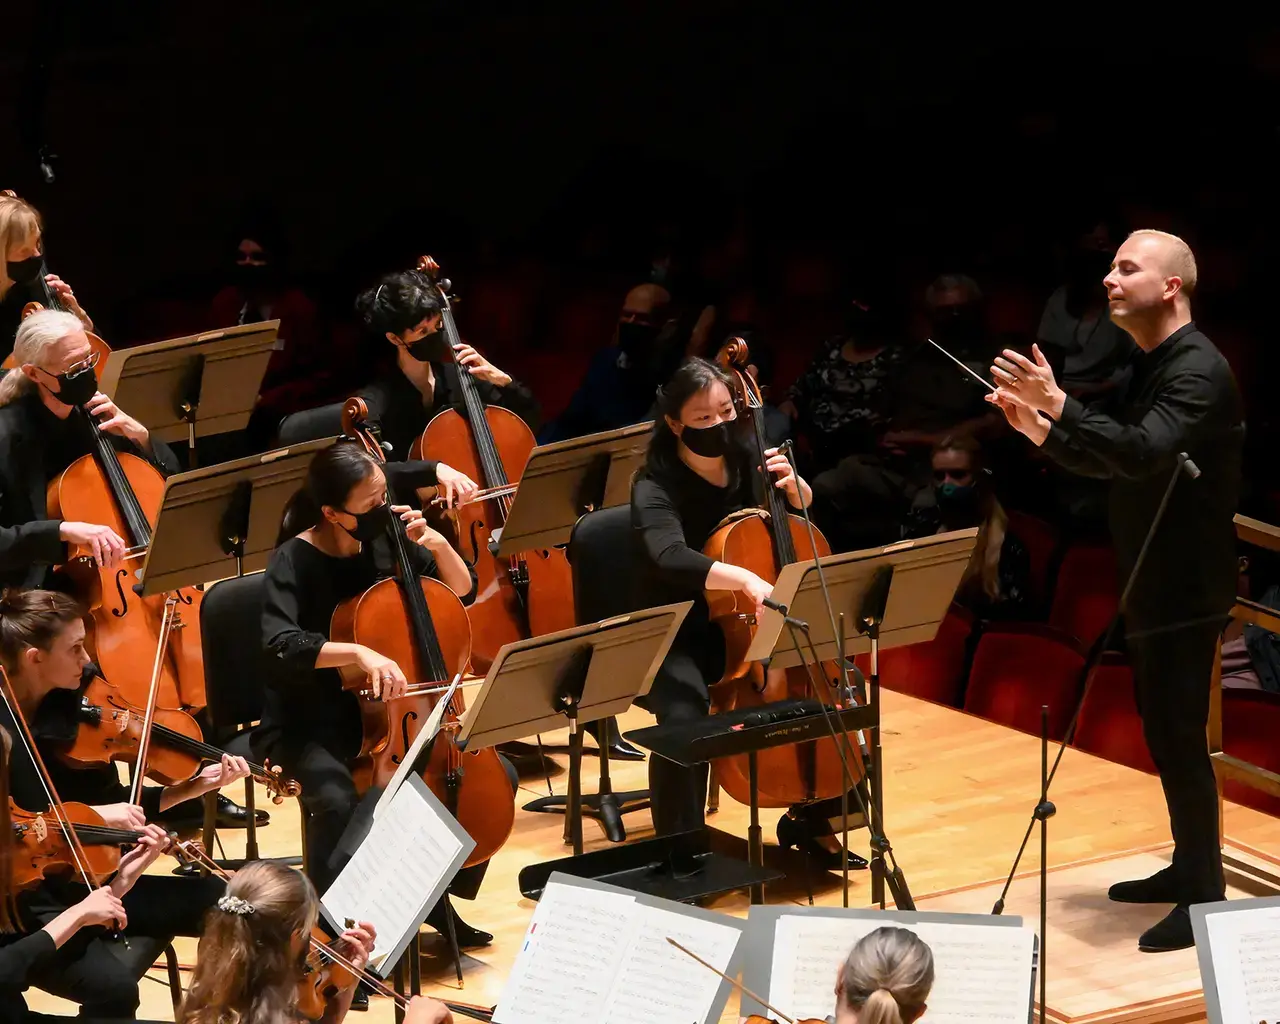 Yannick Nézet-Séguin with The Philadelphia Orchestra. Photo by Jessica Griffin.